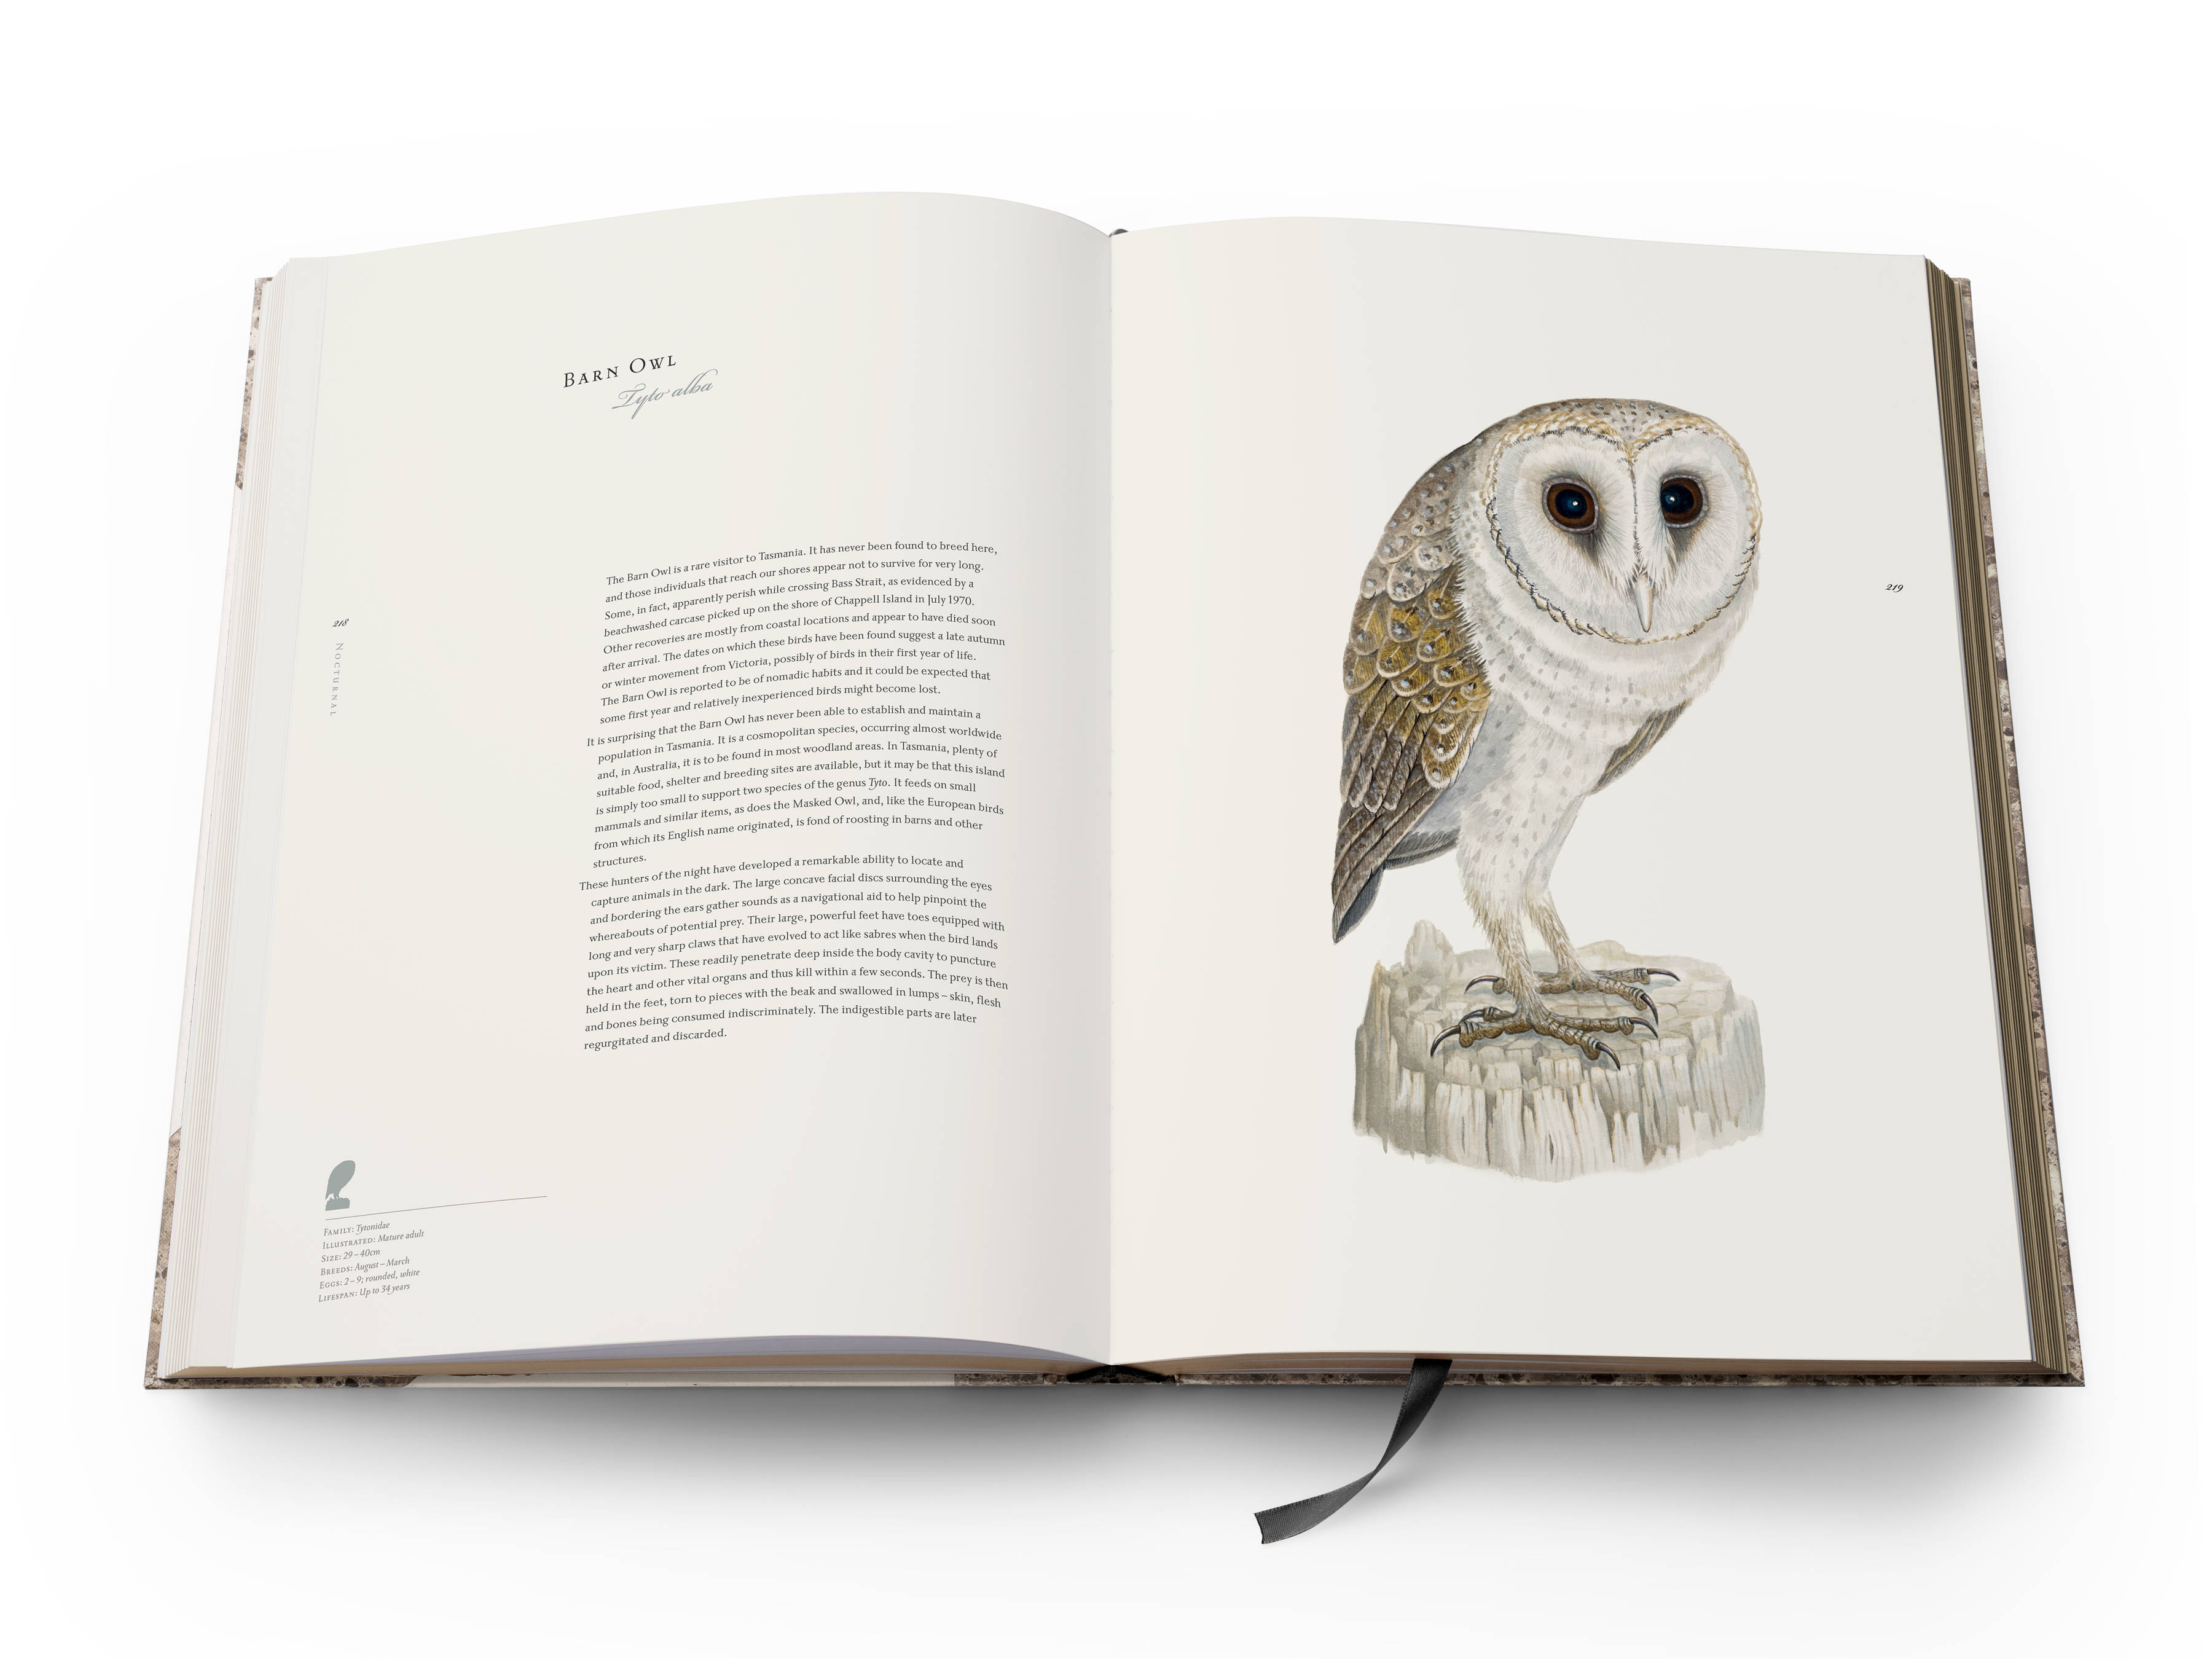 A double page spread from the book with text on the left and a full-page colour plate of a Barn Owl ‘Tyto alba’ on the right.